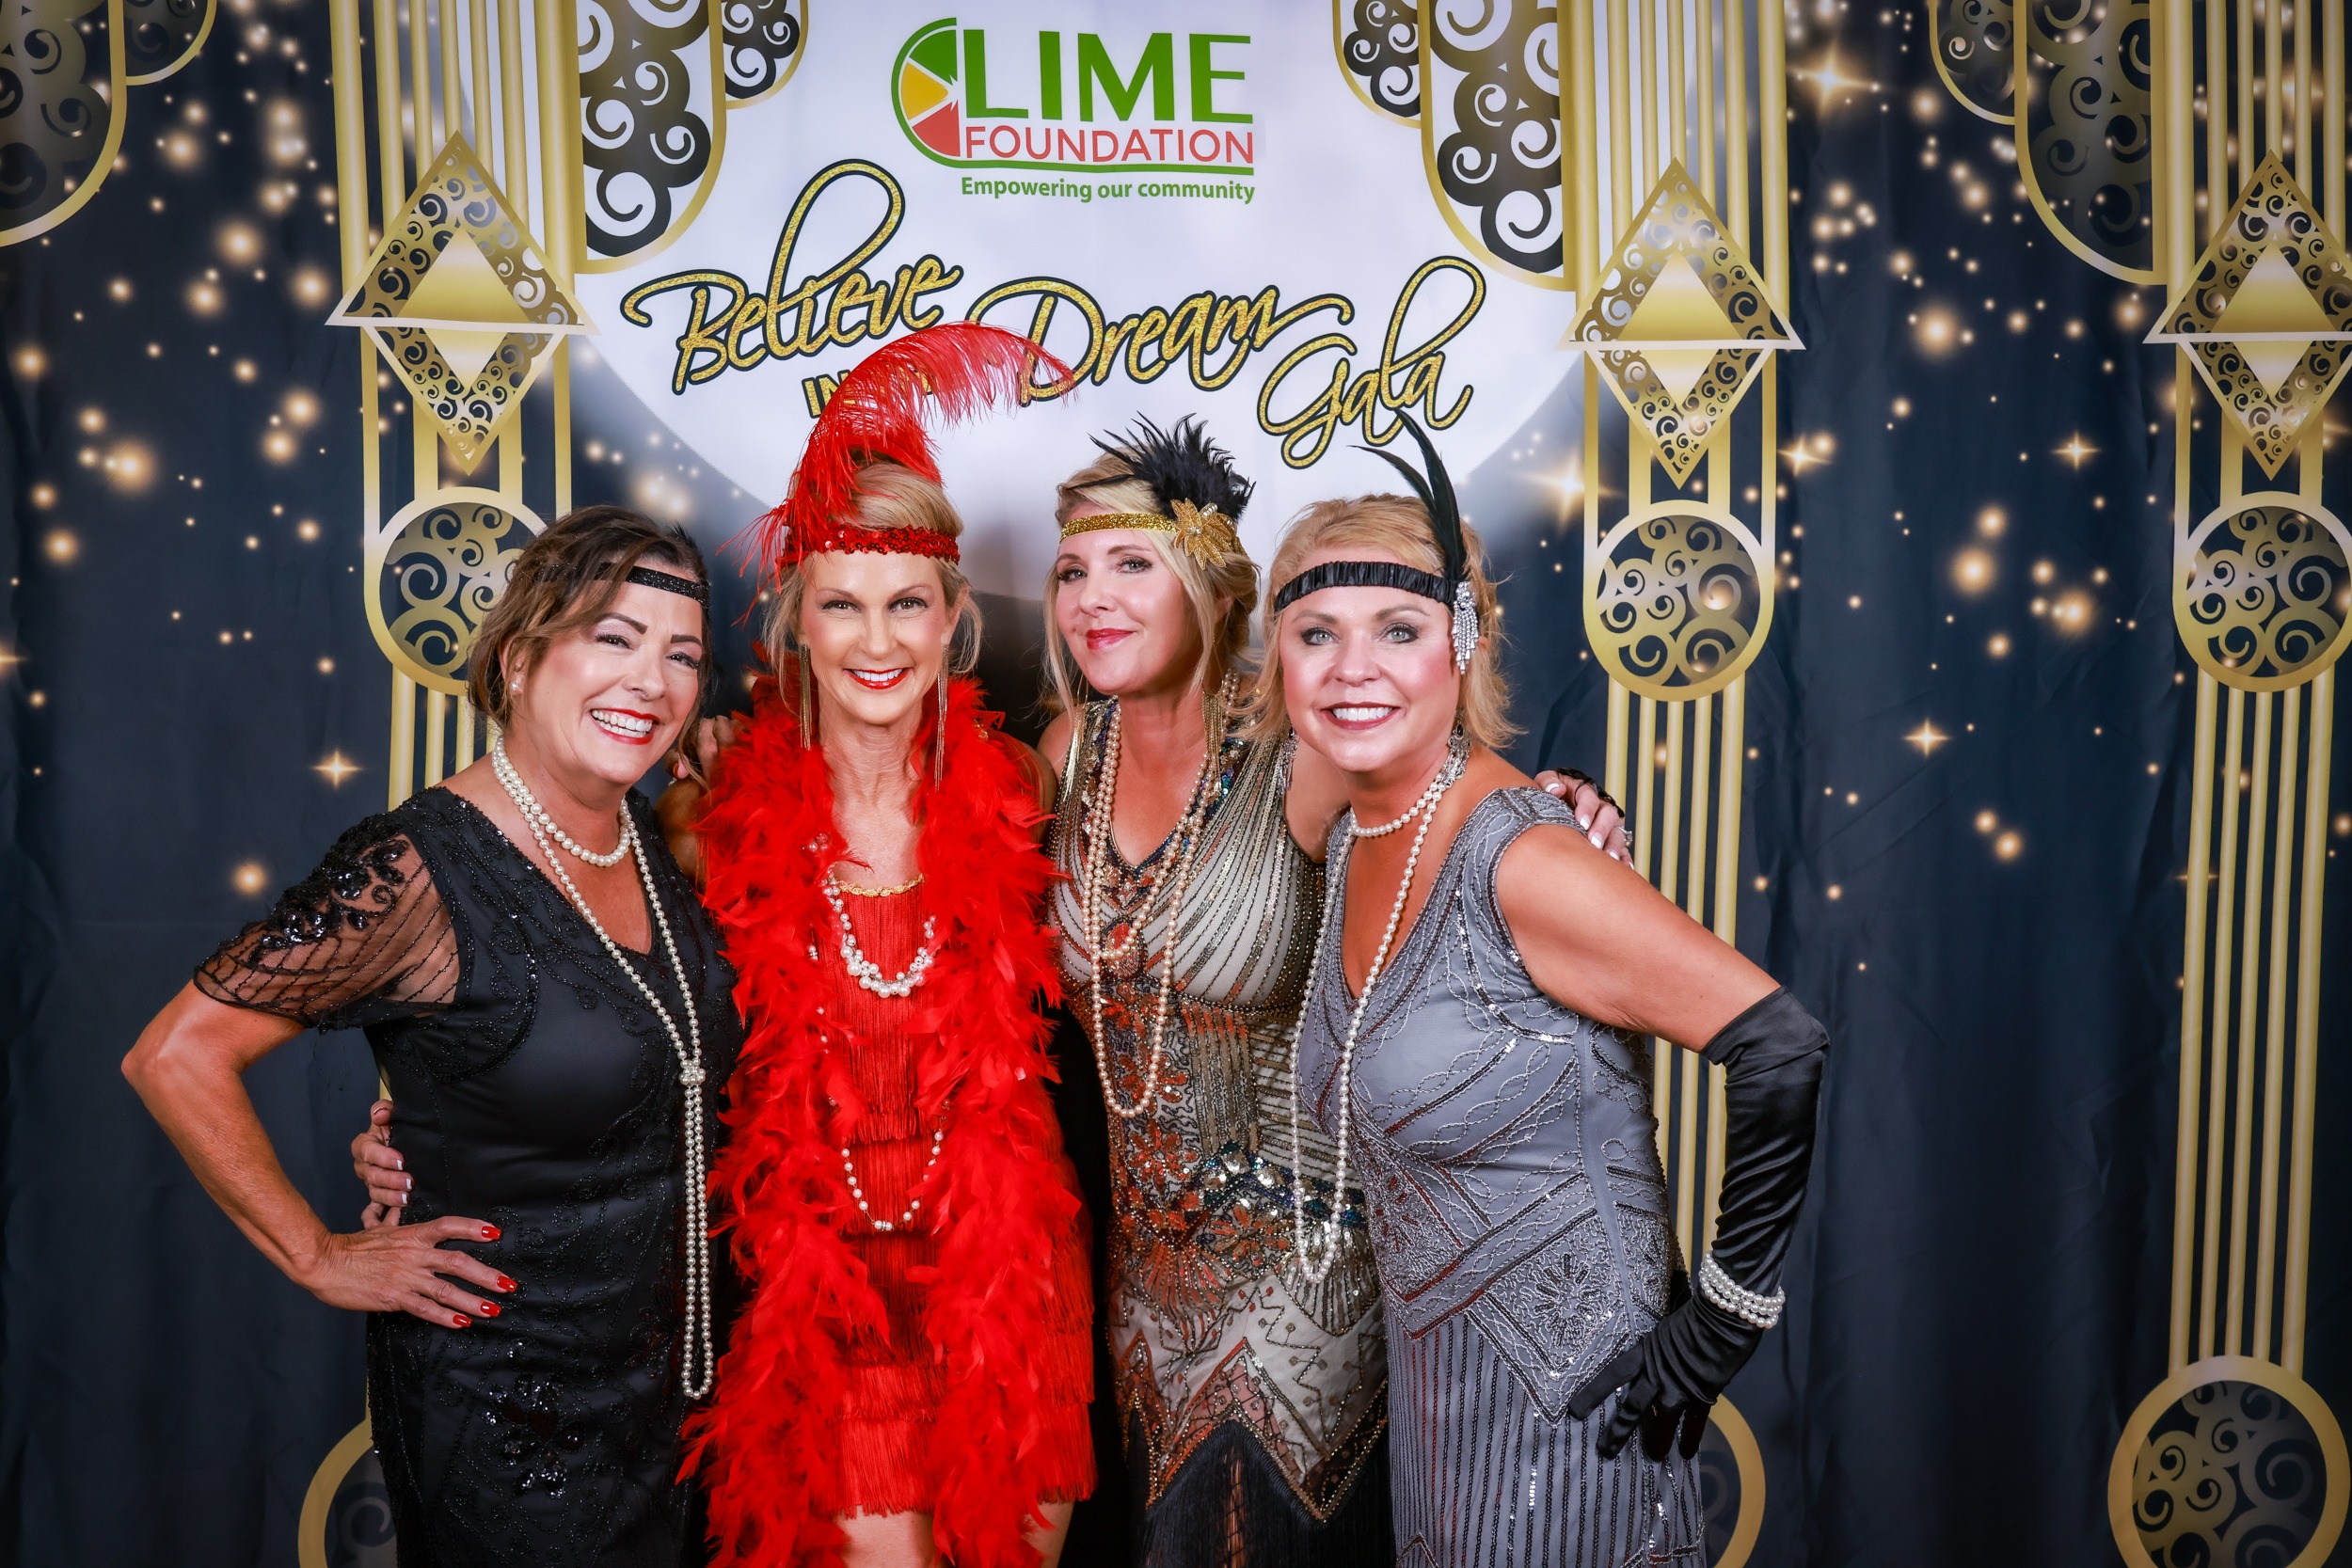 A group of women in flapper costumes posing for a photo at an event hosted by The LIME Foundation of Santa Rosa.